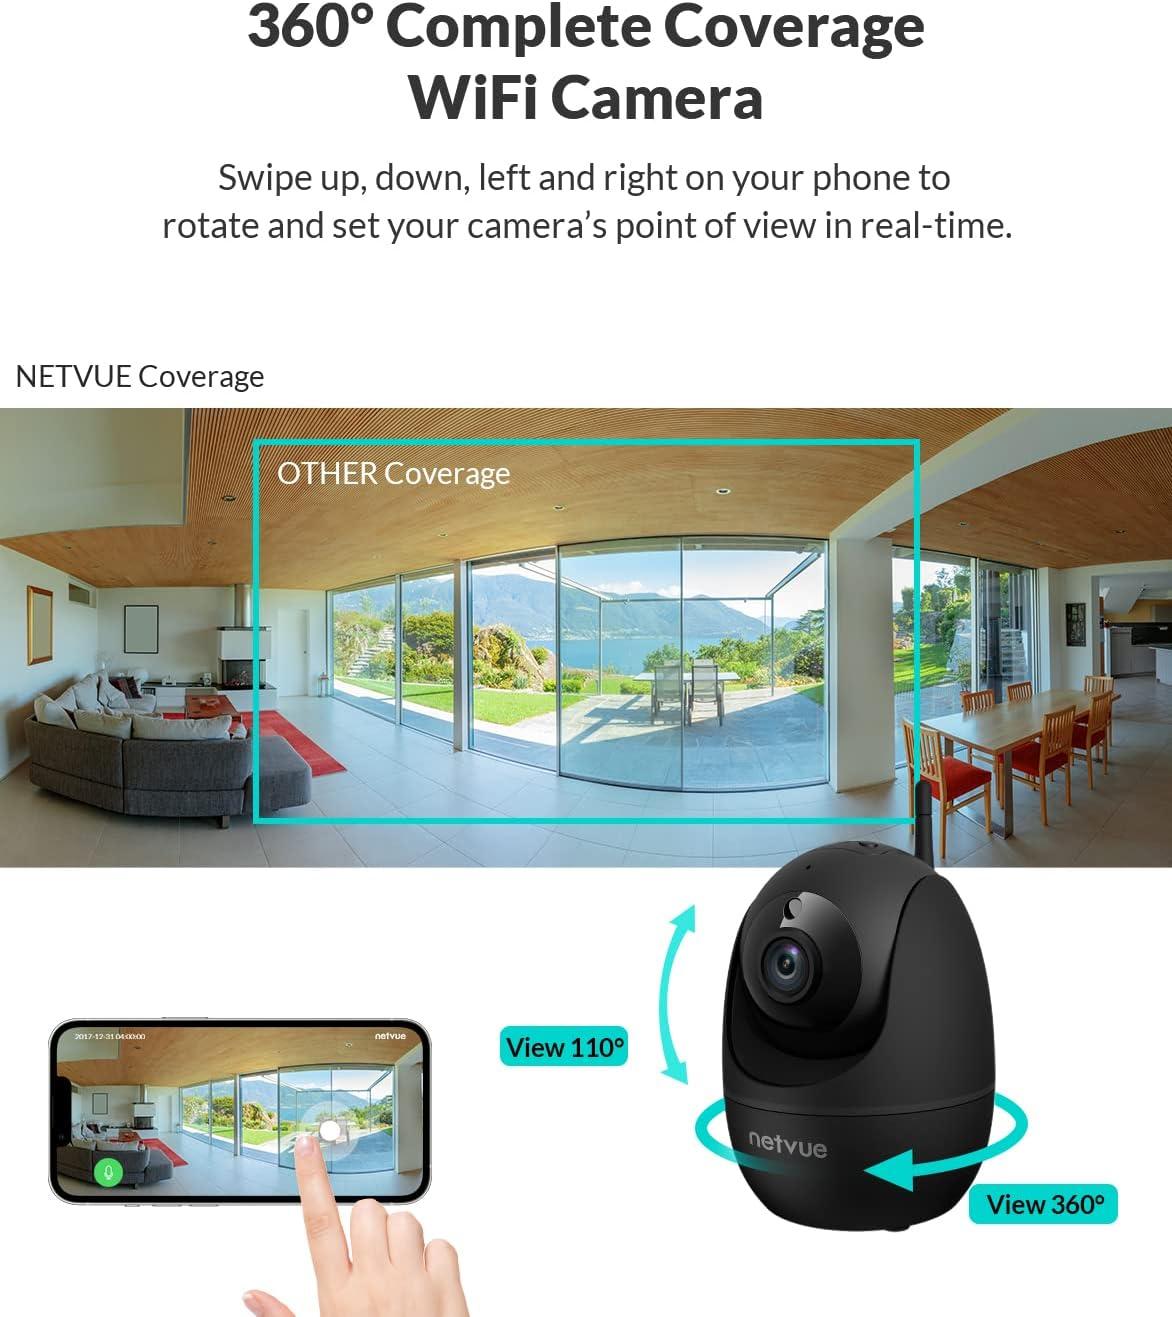 NETVUE 1080P WiFi Security Camera, Pet Camera 2 Way Audio, Baby Monitor,  Night Vision, Smart AI. Human Detection, Pan Tilt Zoom, Works with Alexa,  Baby Camera with Cloud Storage (Black)